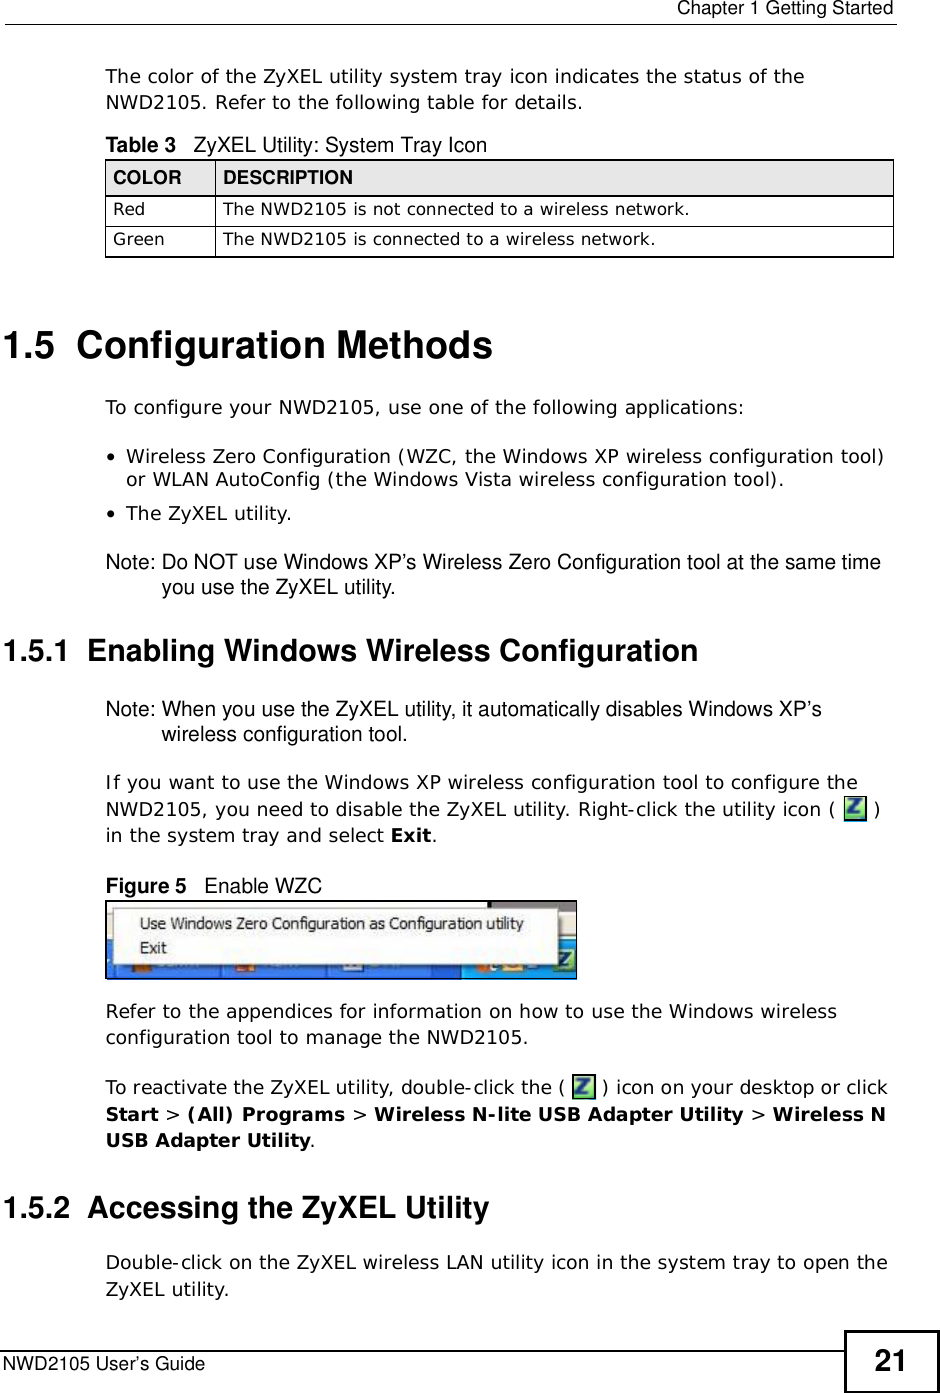  Chapter 1Getting StartedNWD2105 User’s Guide 21The color of the ZyXEL utility system tray icon indicates the status of the NWD2105. Refer to the following table for details. 1.5  Configuration MethodsTo configure your NWD2105, use one of the following applications:•Wireless Zero Configuration (WZC, the Windows XP wireless configuration tool) or WLAN AutoConfig (the Windows Vista wireless configuration tool).•The ZyXEL utility. Note: Do NOT use Windows XP’s Wireless Zero Configuration tool at the same time you use the ZyXEL utility.1.5.1  Enabling Windows Wireless Configuration Note: When you use the ZyXEL utility, it automatically disables Windows XP’s wireless configuration tool. If you want to use the Windows XP wireless configuration tool to configure the NWD2105, you need to disable the ZyXEL utility. Right-click the utility icon (  ) in the system tray and select Exit.Figure 5   Enable WZCRefer to the appendices for information on how to use the Windows wireless configuration tool to manage the NWD2105.To reactivate the ZyXEL utility, double-click the (  ) icon on your desktop or click Start &gt; (All) Programs &gt; Wireless N-lite USB Adapter Utility &gt;Wireless N USB Adapter Utility.1.5.2  Accessing the ZyXEL Utility Double-click on the ZyXEL wireless LAN utility icon in the system tray to open the ZyXEL utility. Table 3   ZyXEL Utility: System Tray Icon COLOR DESCRIPTIONRedThe NWD2105 is not connected to a wireless network.GreenThe NWD2105 is connected to a wireless network.